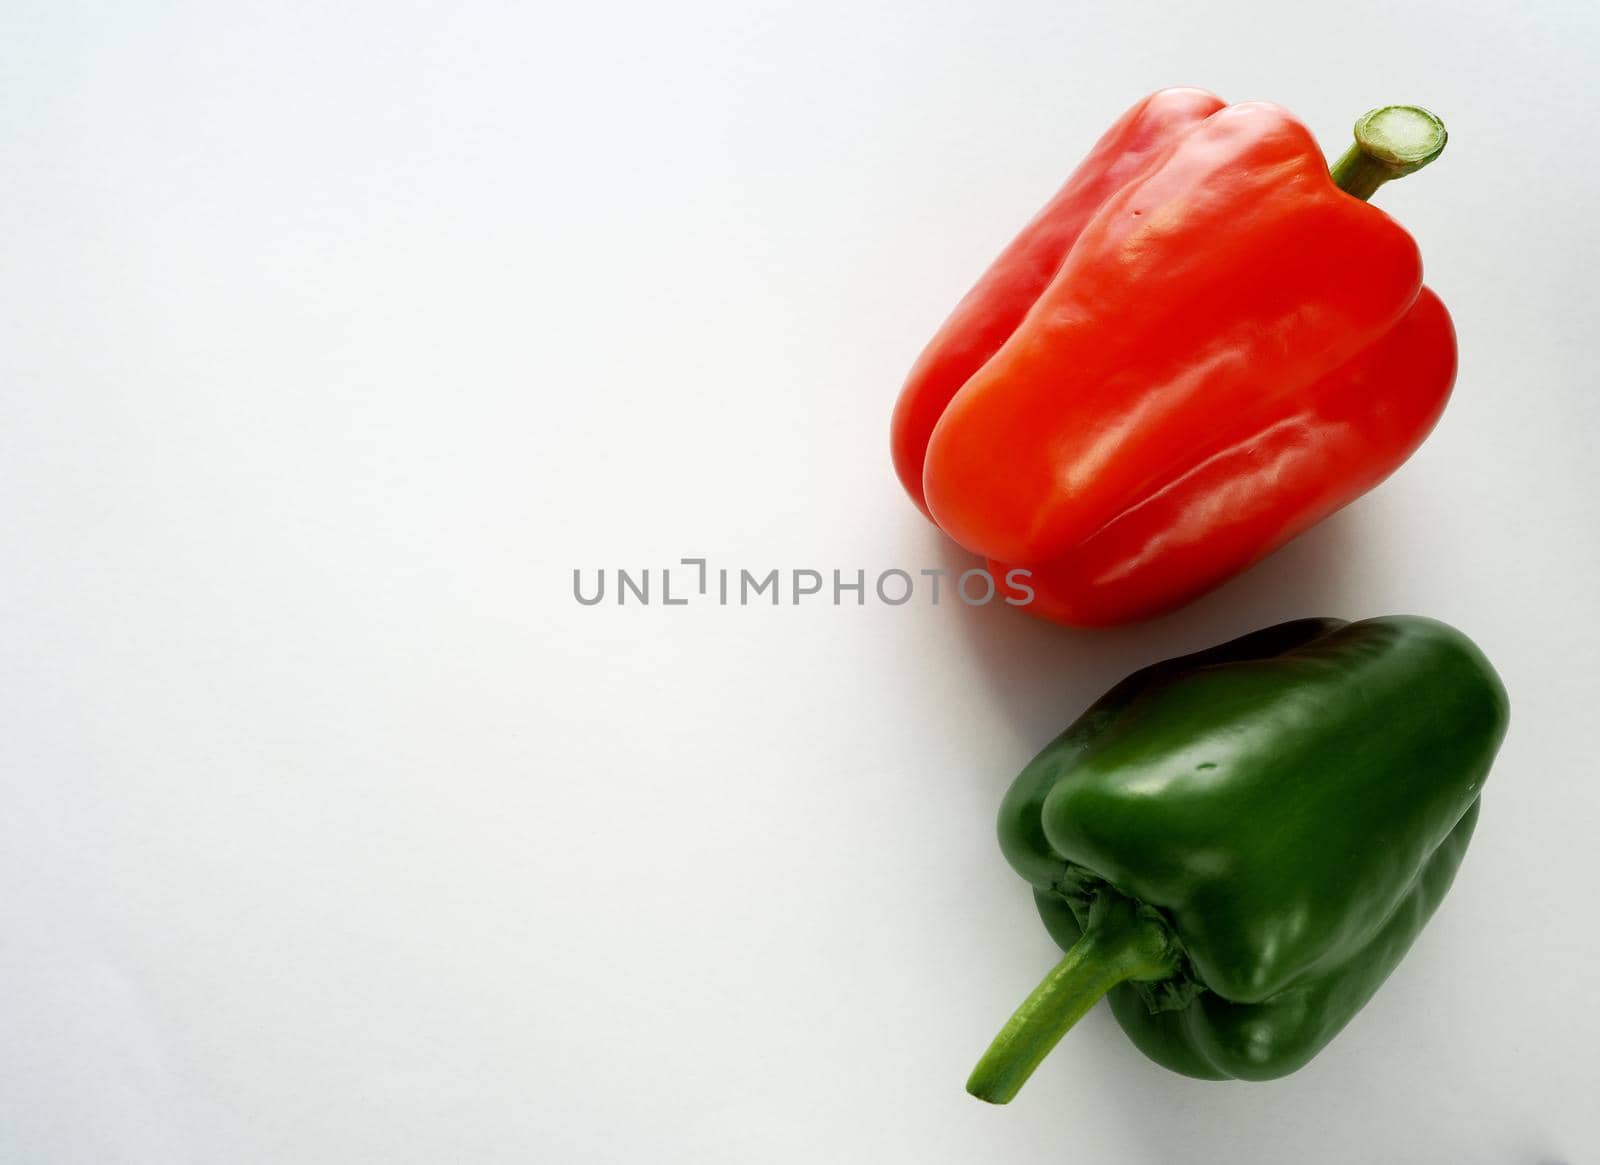 Ripe bell pepper, red, green, close-up on a white background.